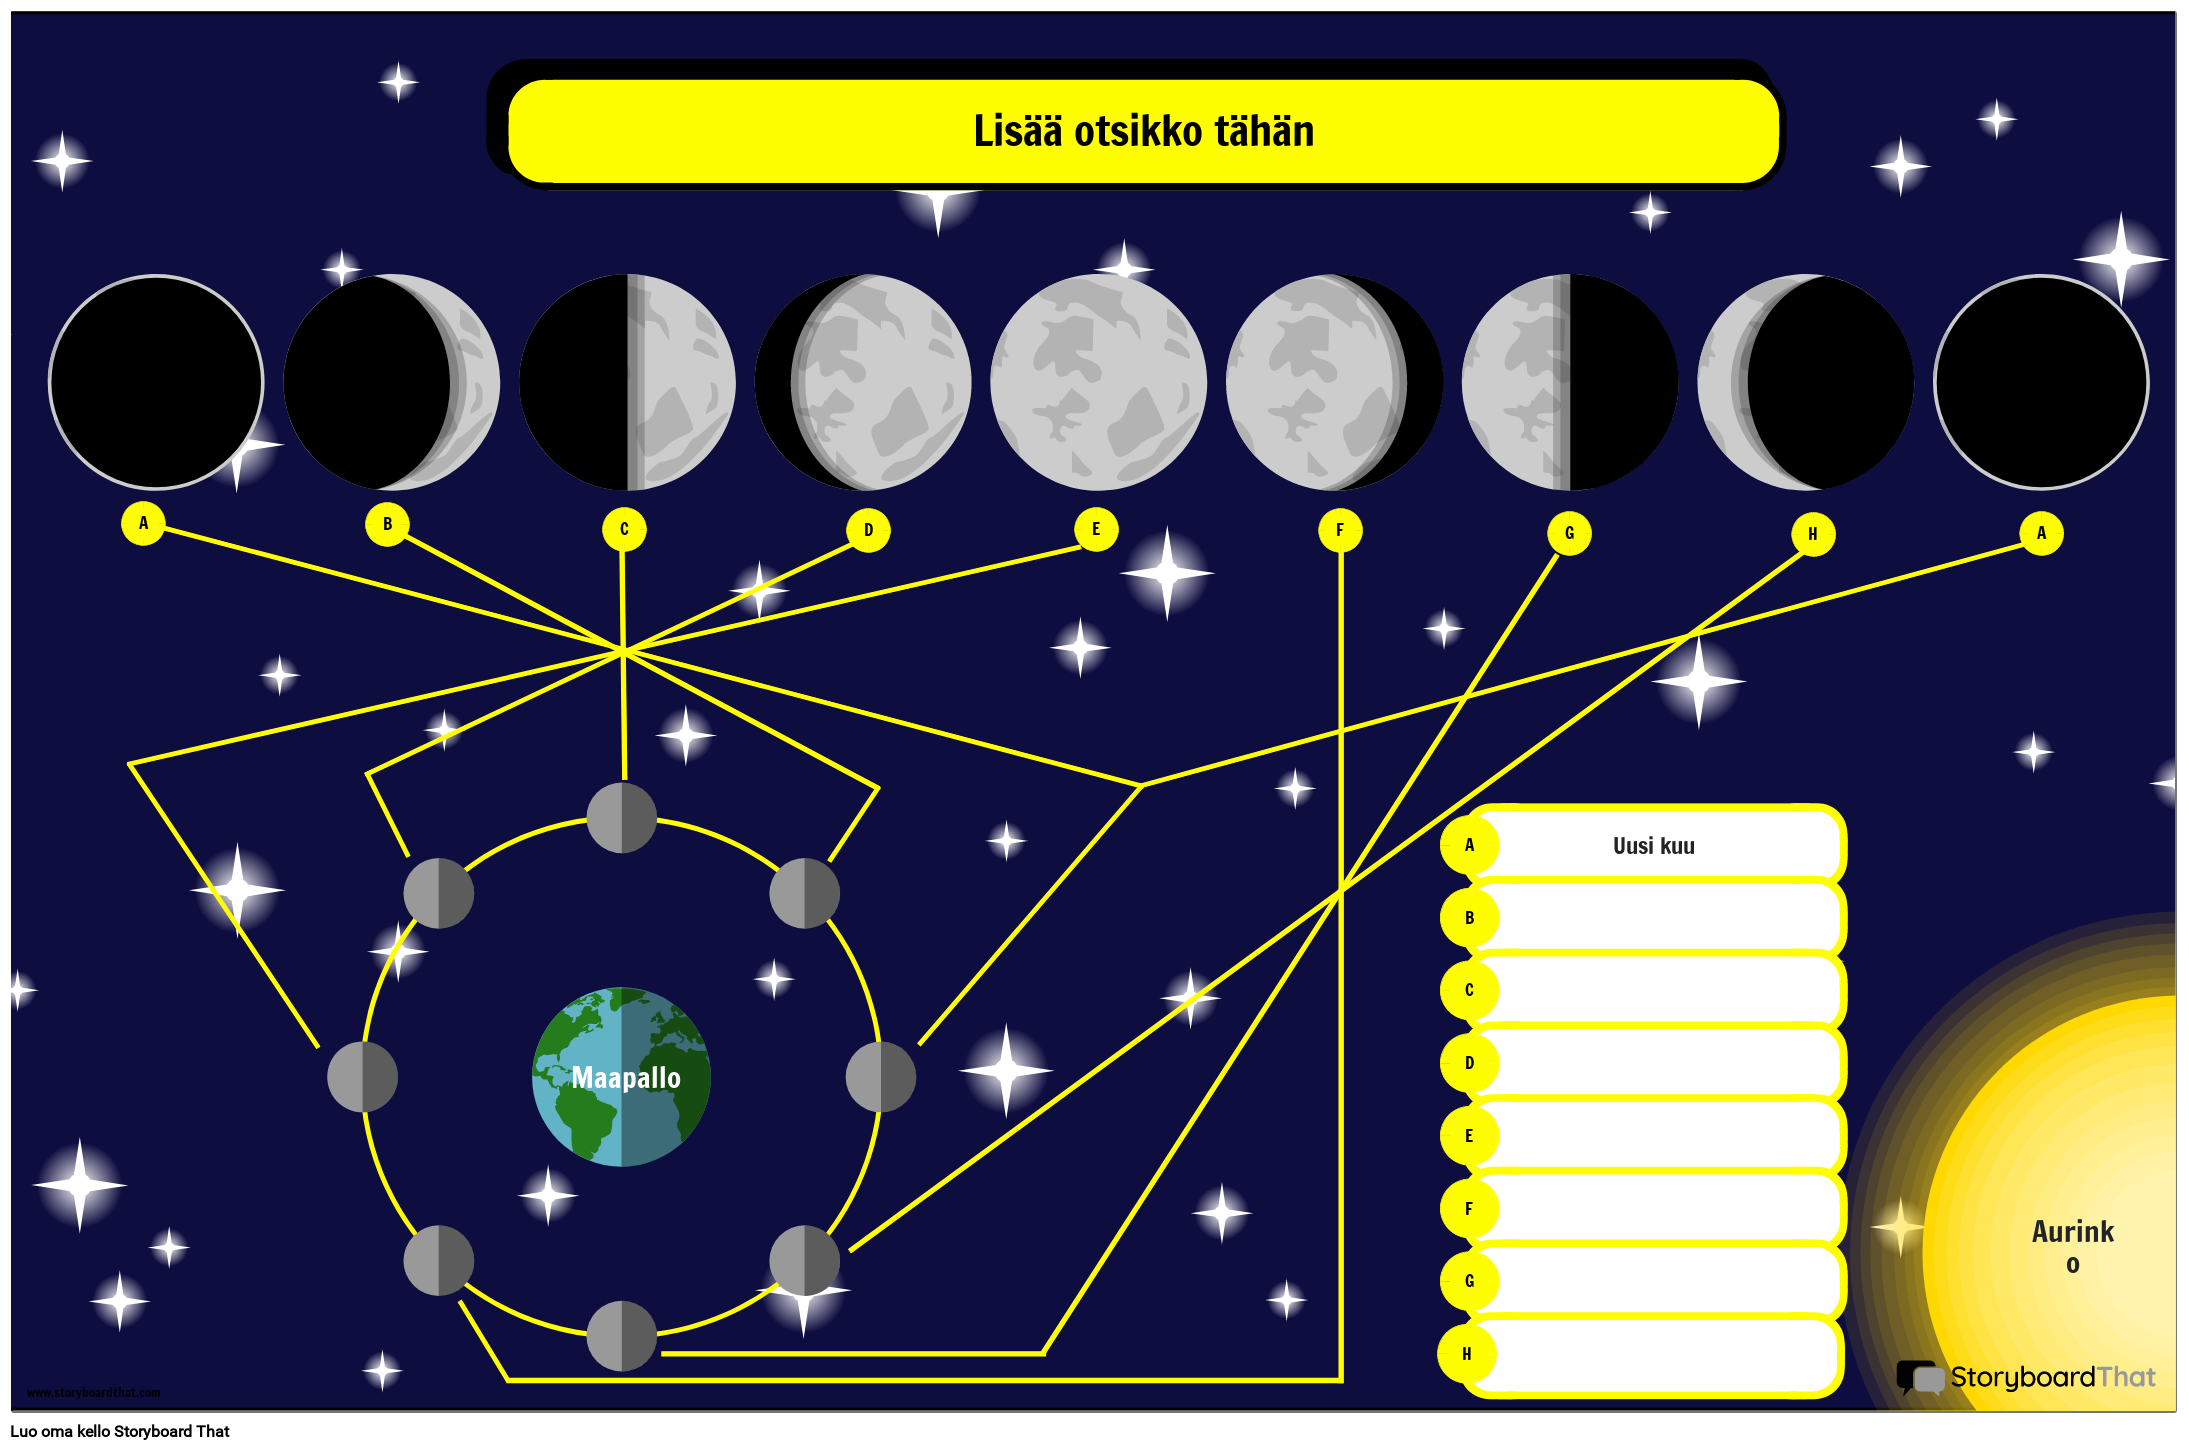 Galaxy-teemainen Phases of the Moon -juliste